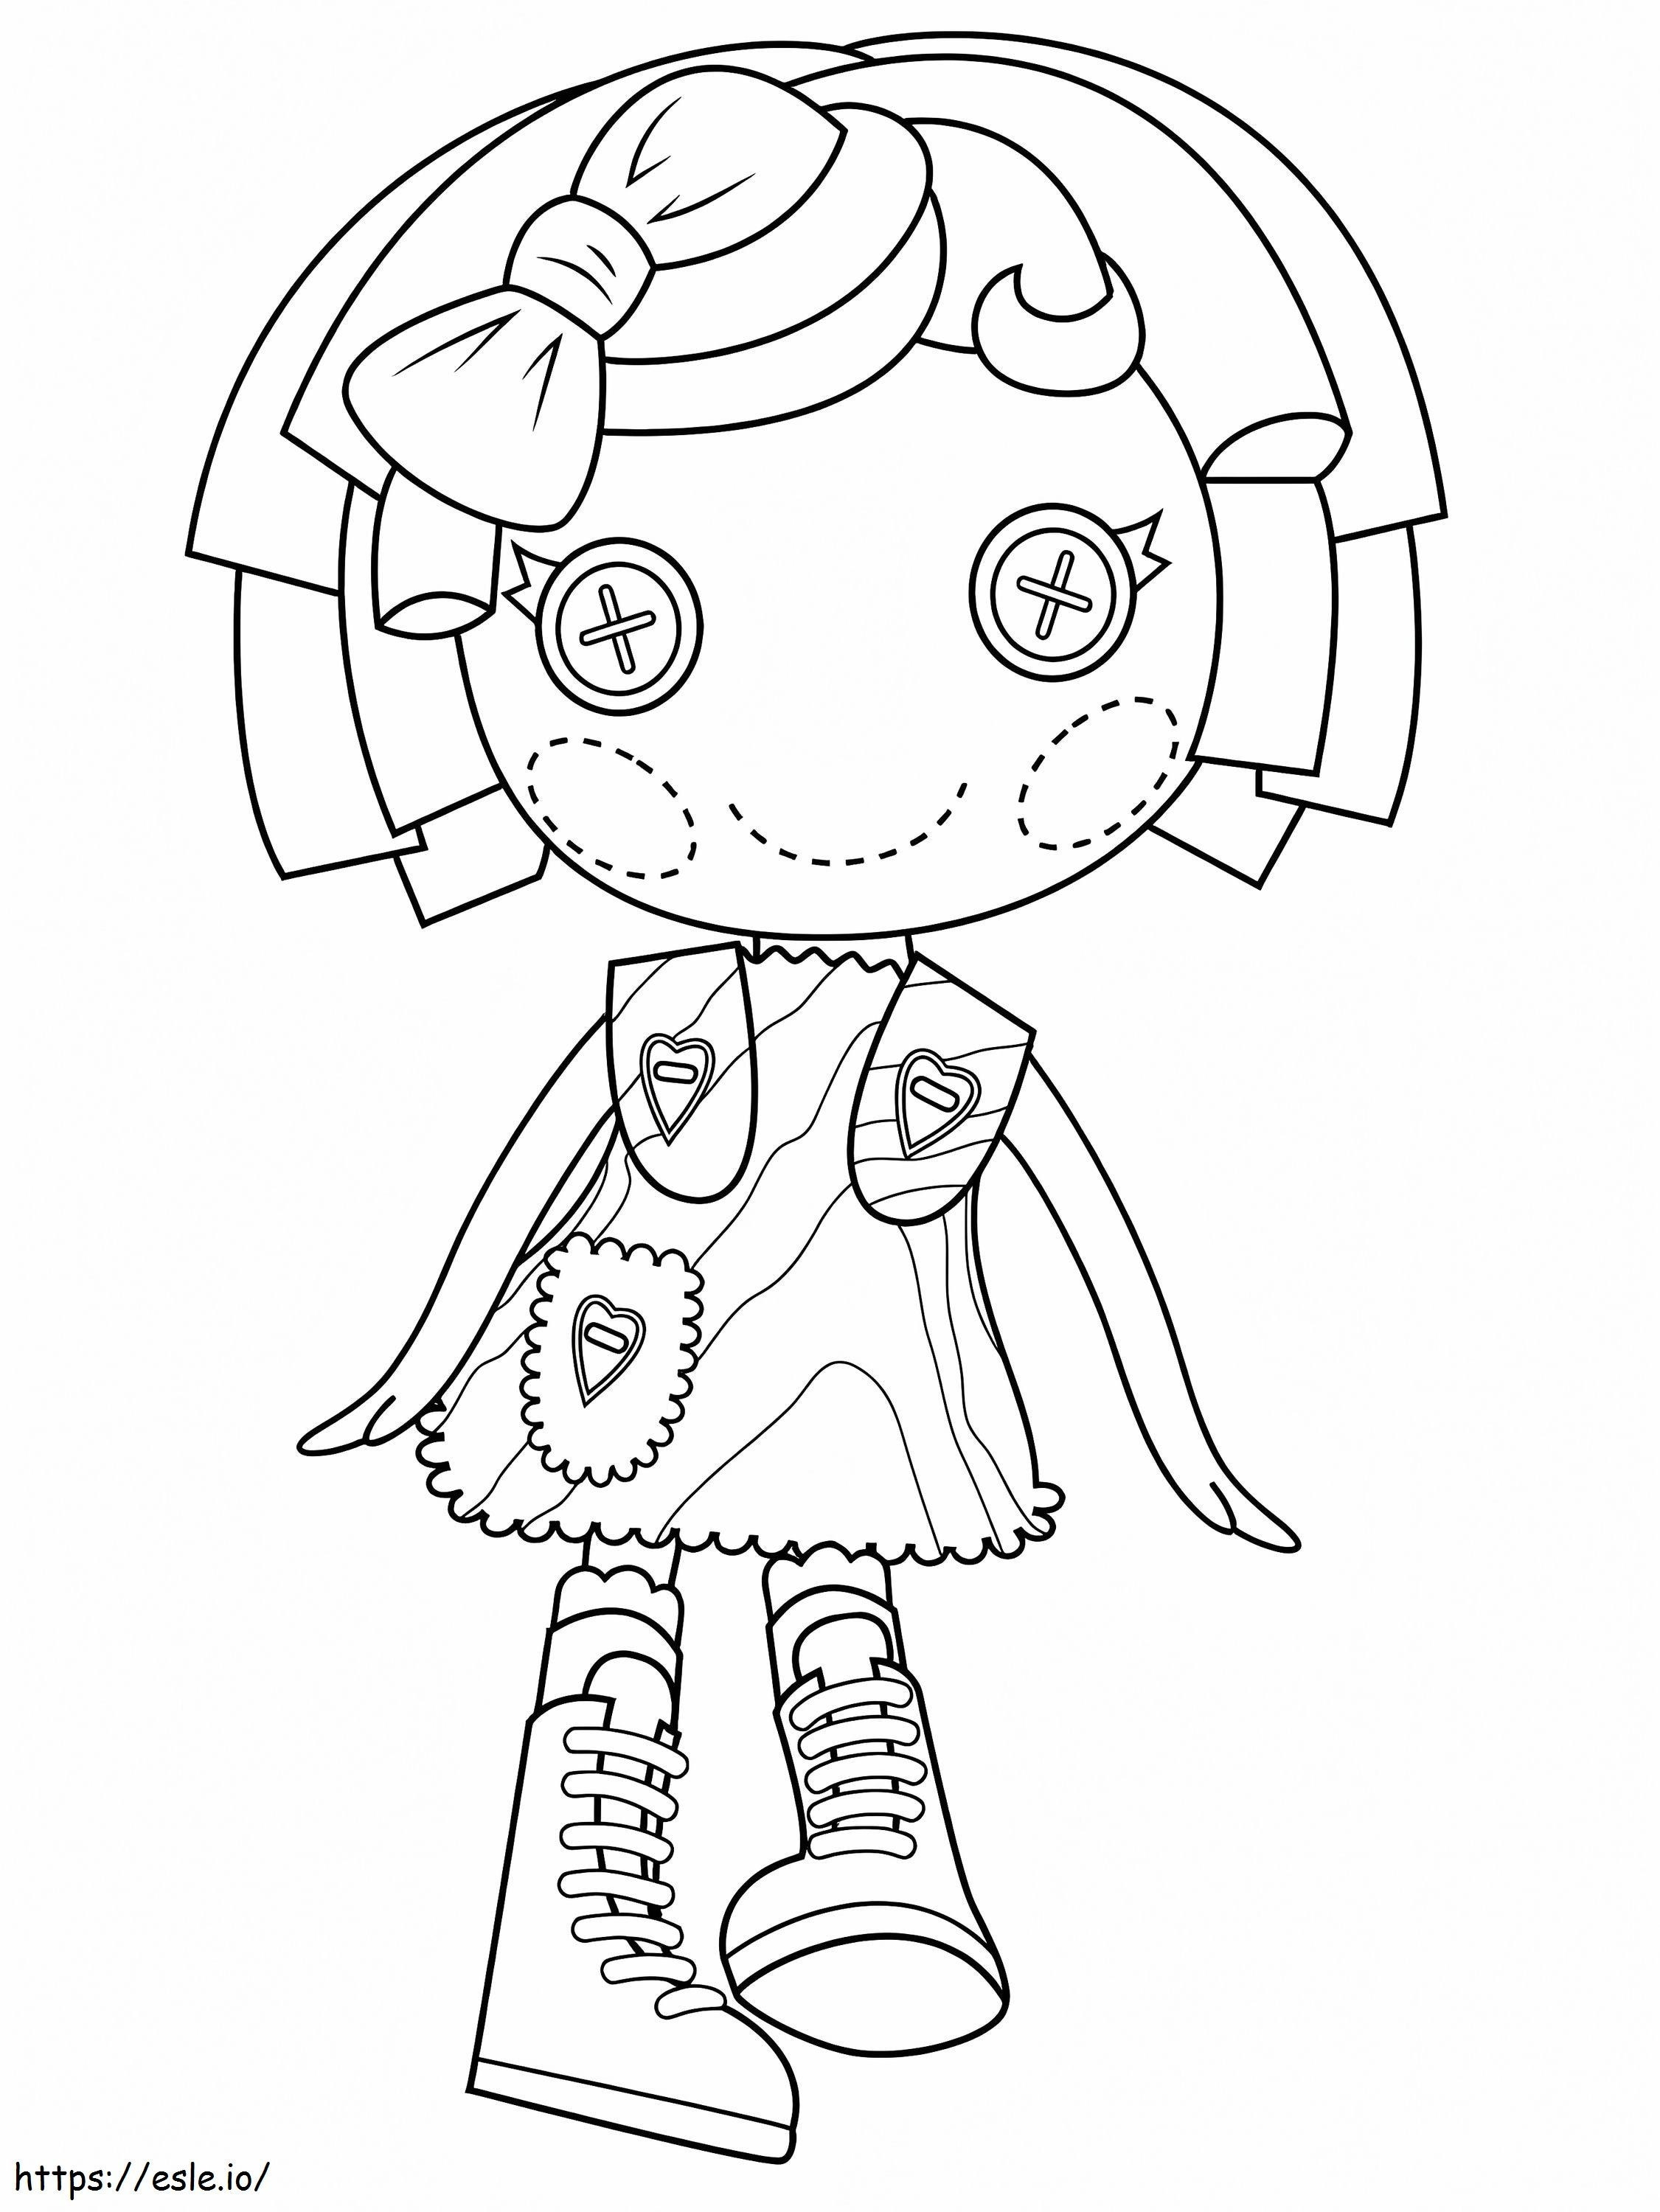 Pillow Featherbed Lalaloopsy coloring page